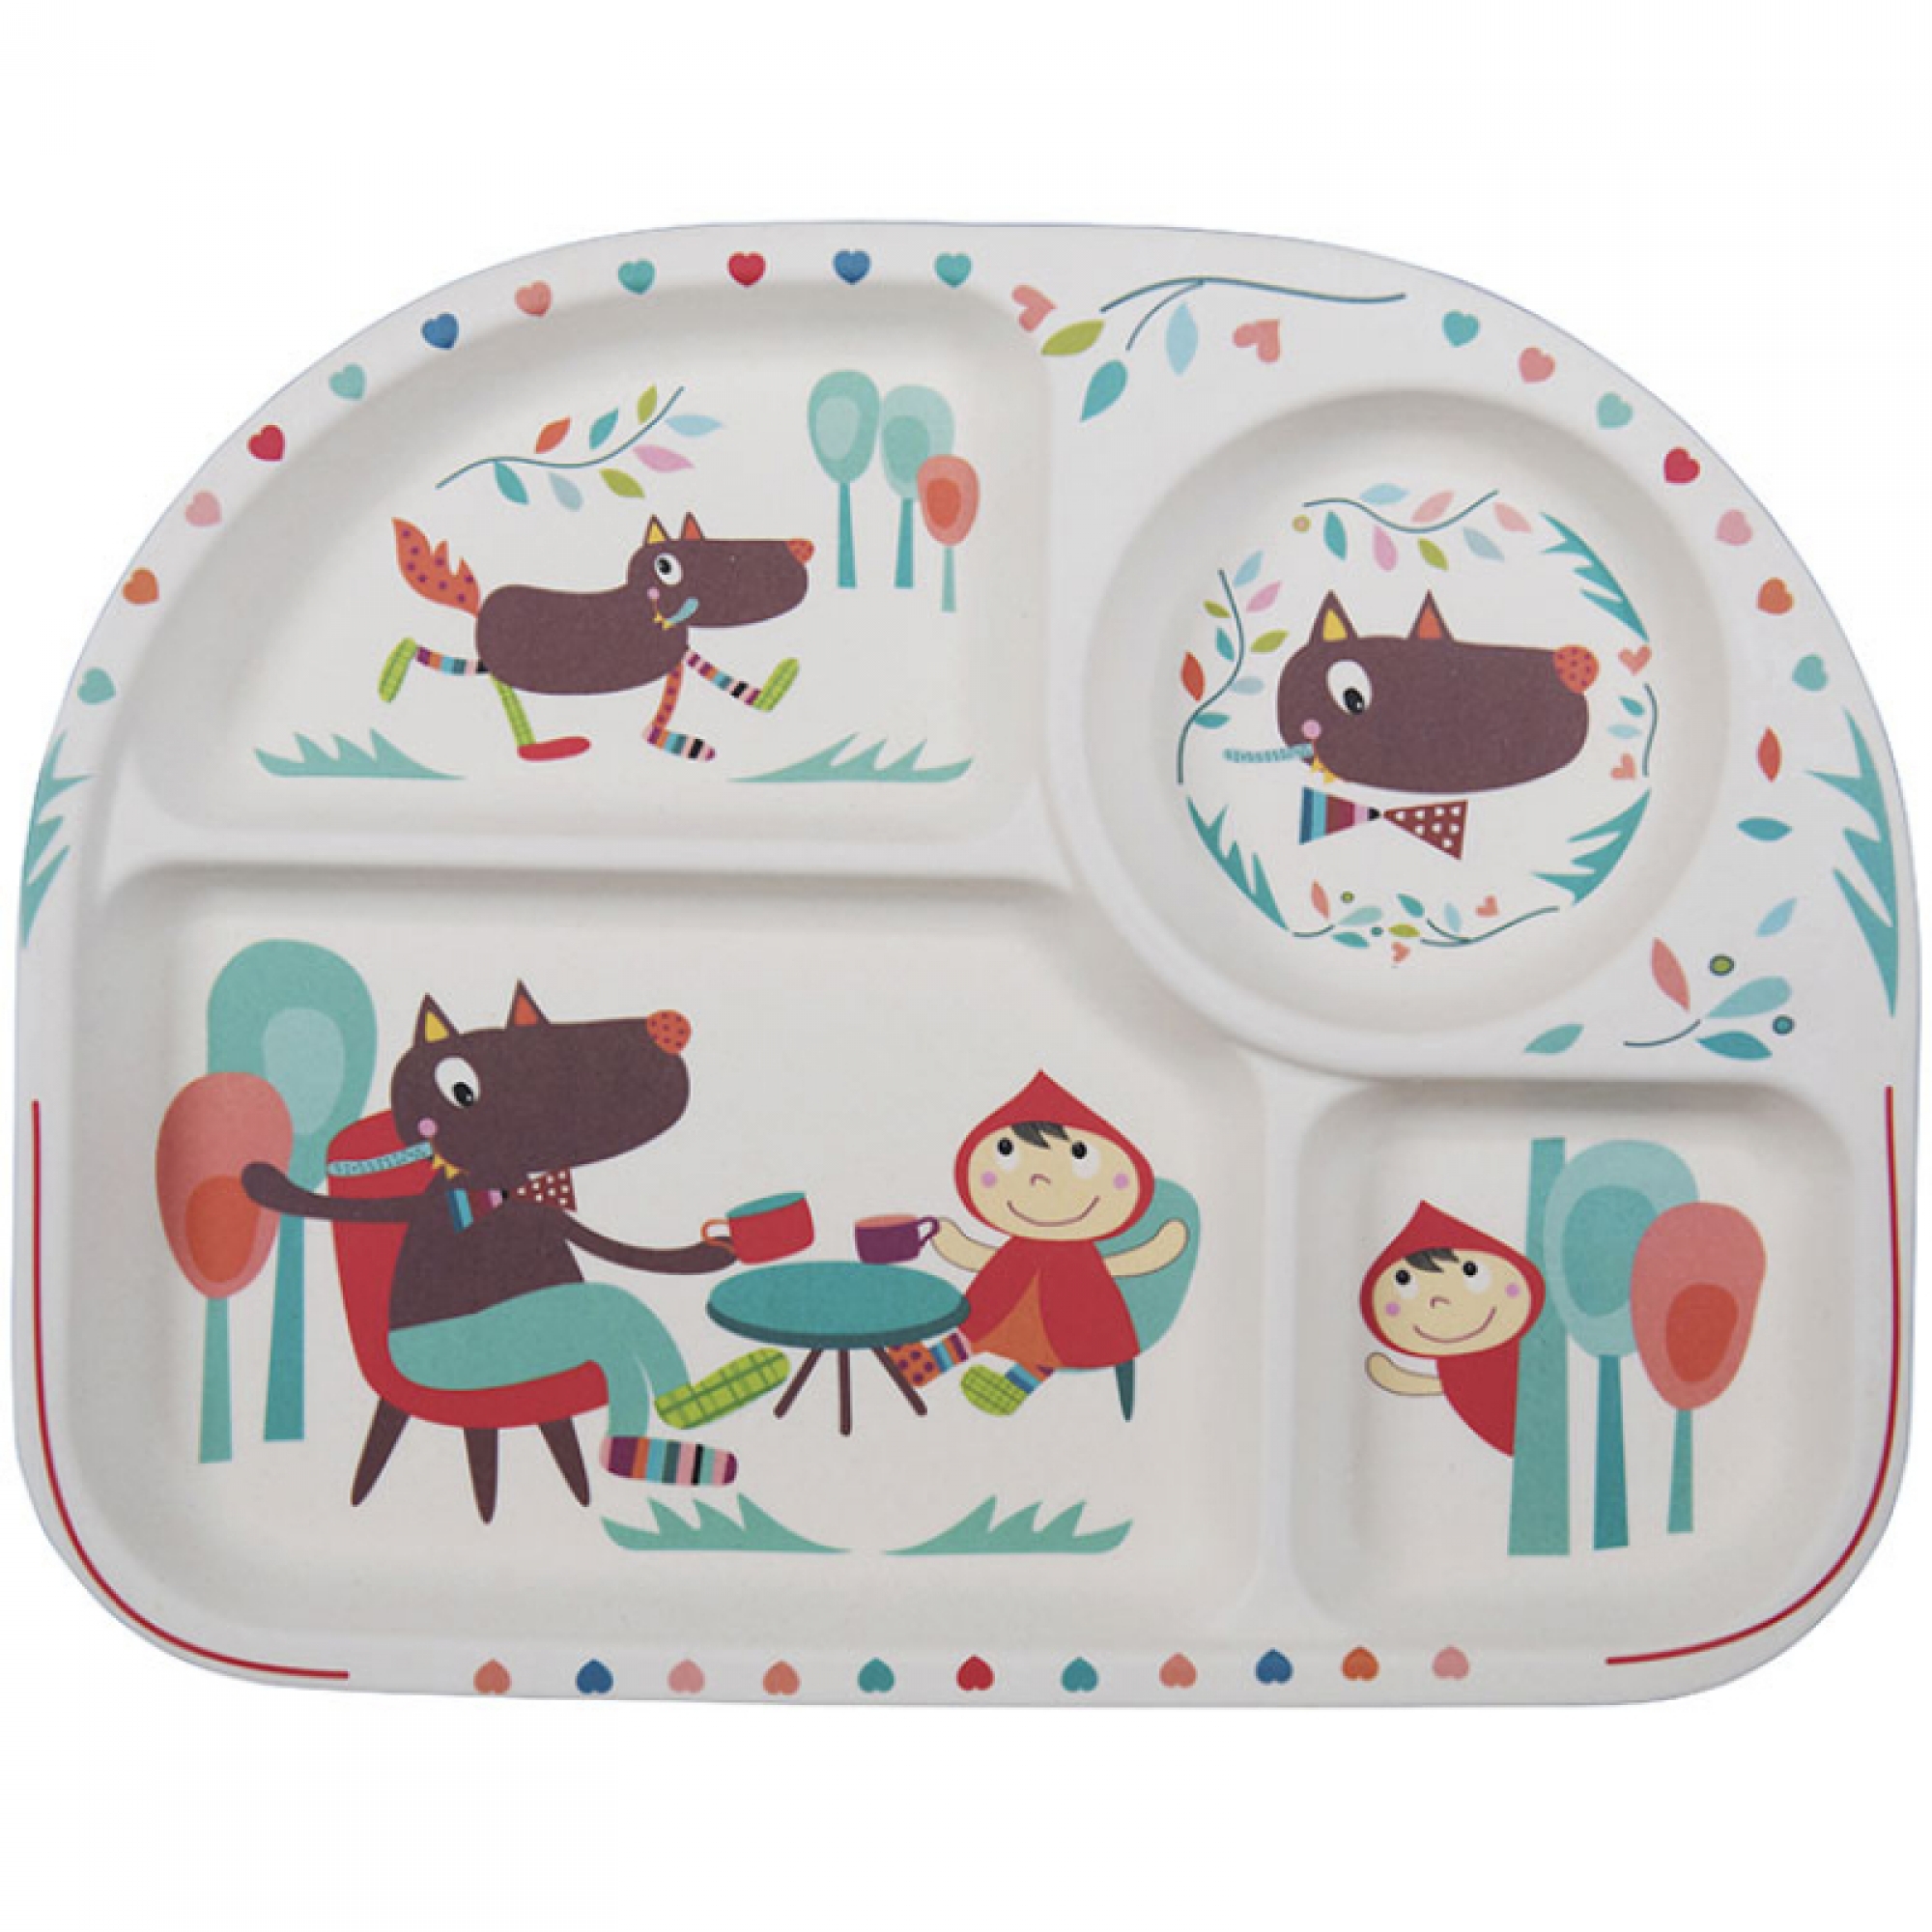 Ebulobo Assiette Compartiment Bambou T Es Fou Louloup Made In Bebe